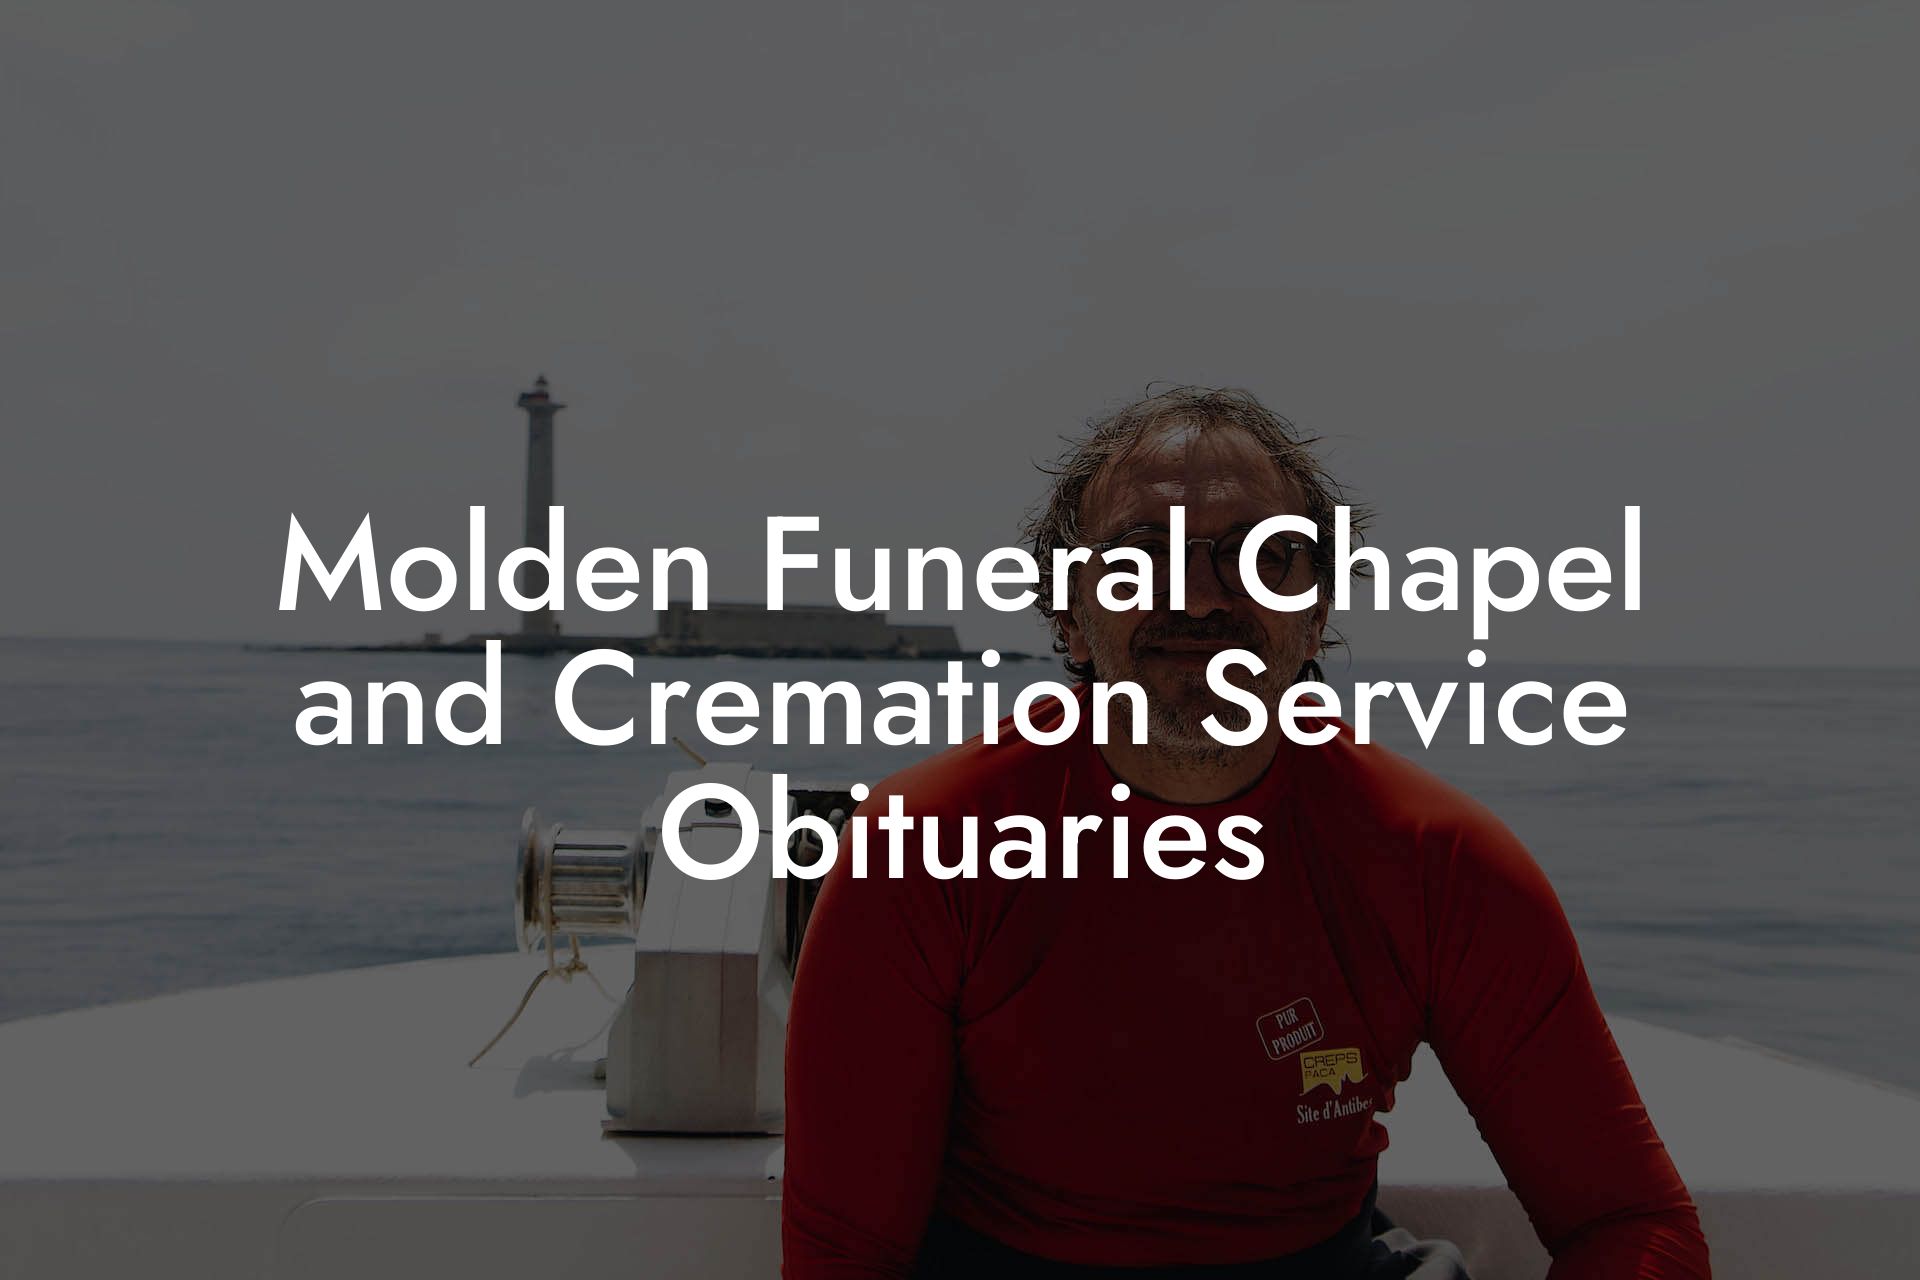 Molden Funeral Chapel and Cremation Service Obituaries